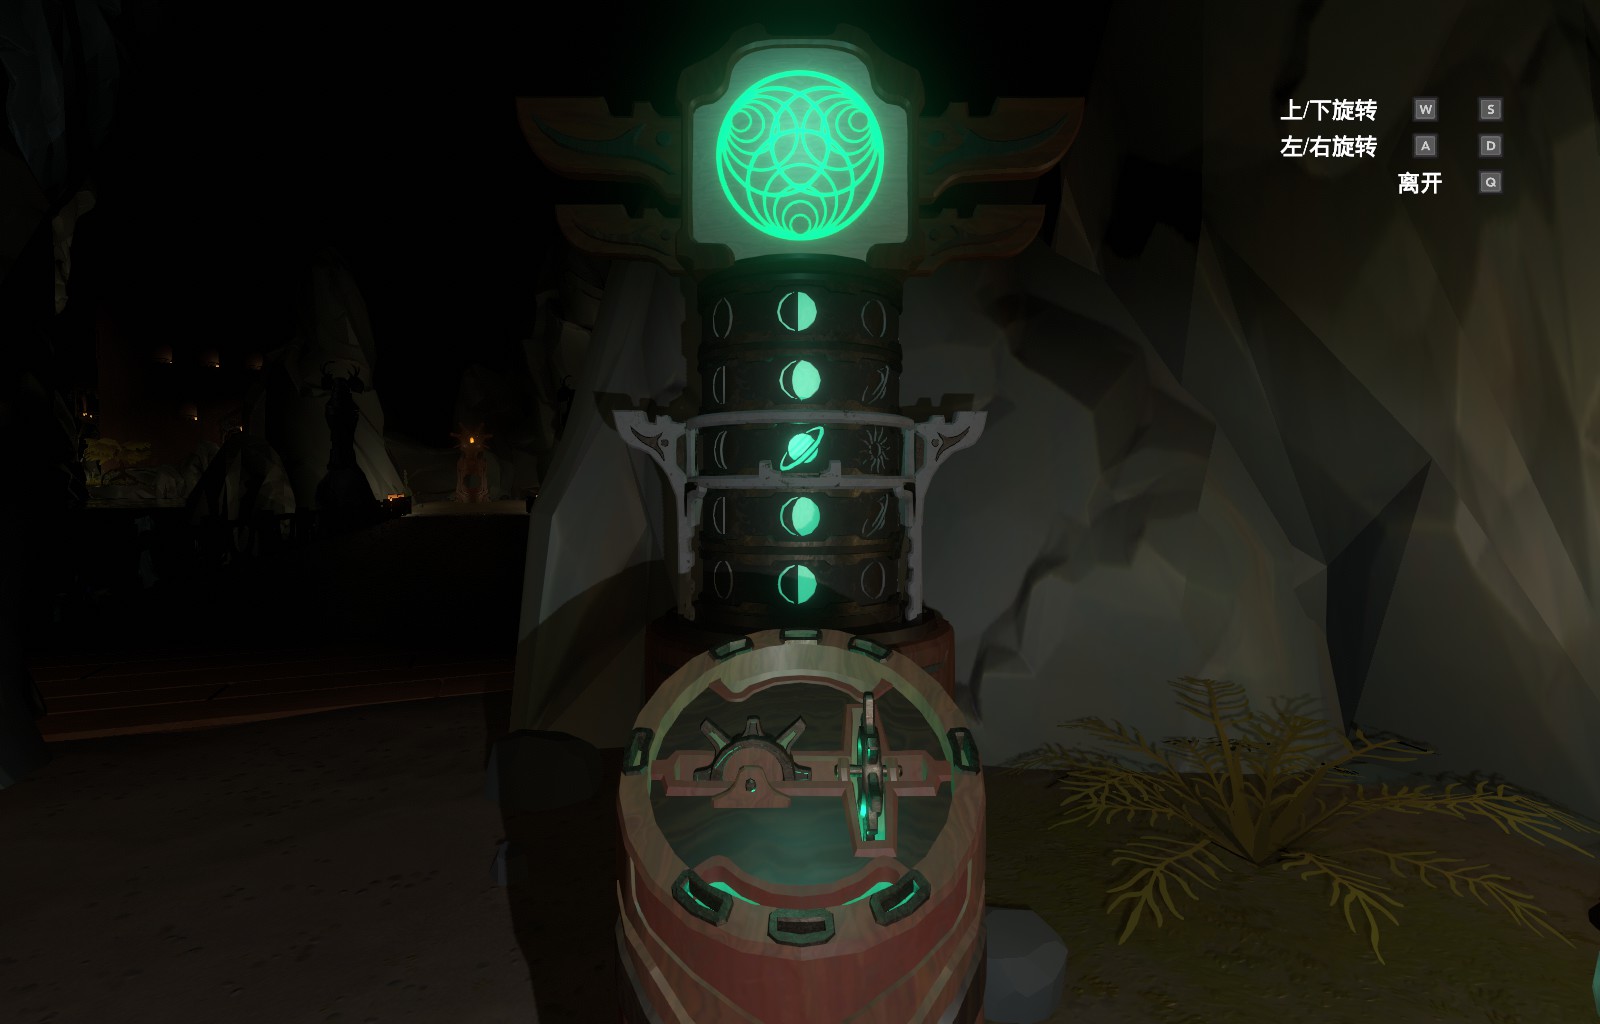 Outer Wilds Three Key Of The Subterranean Lake - DLC Ending - Abnormal Way - 122EB49